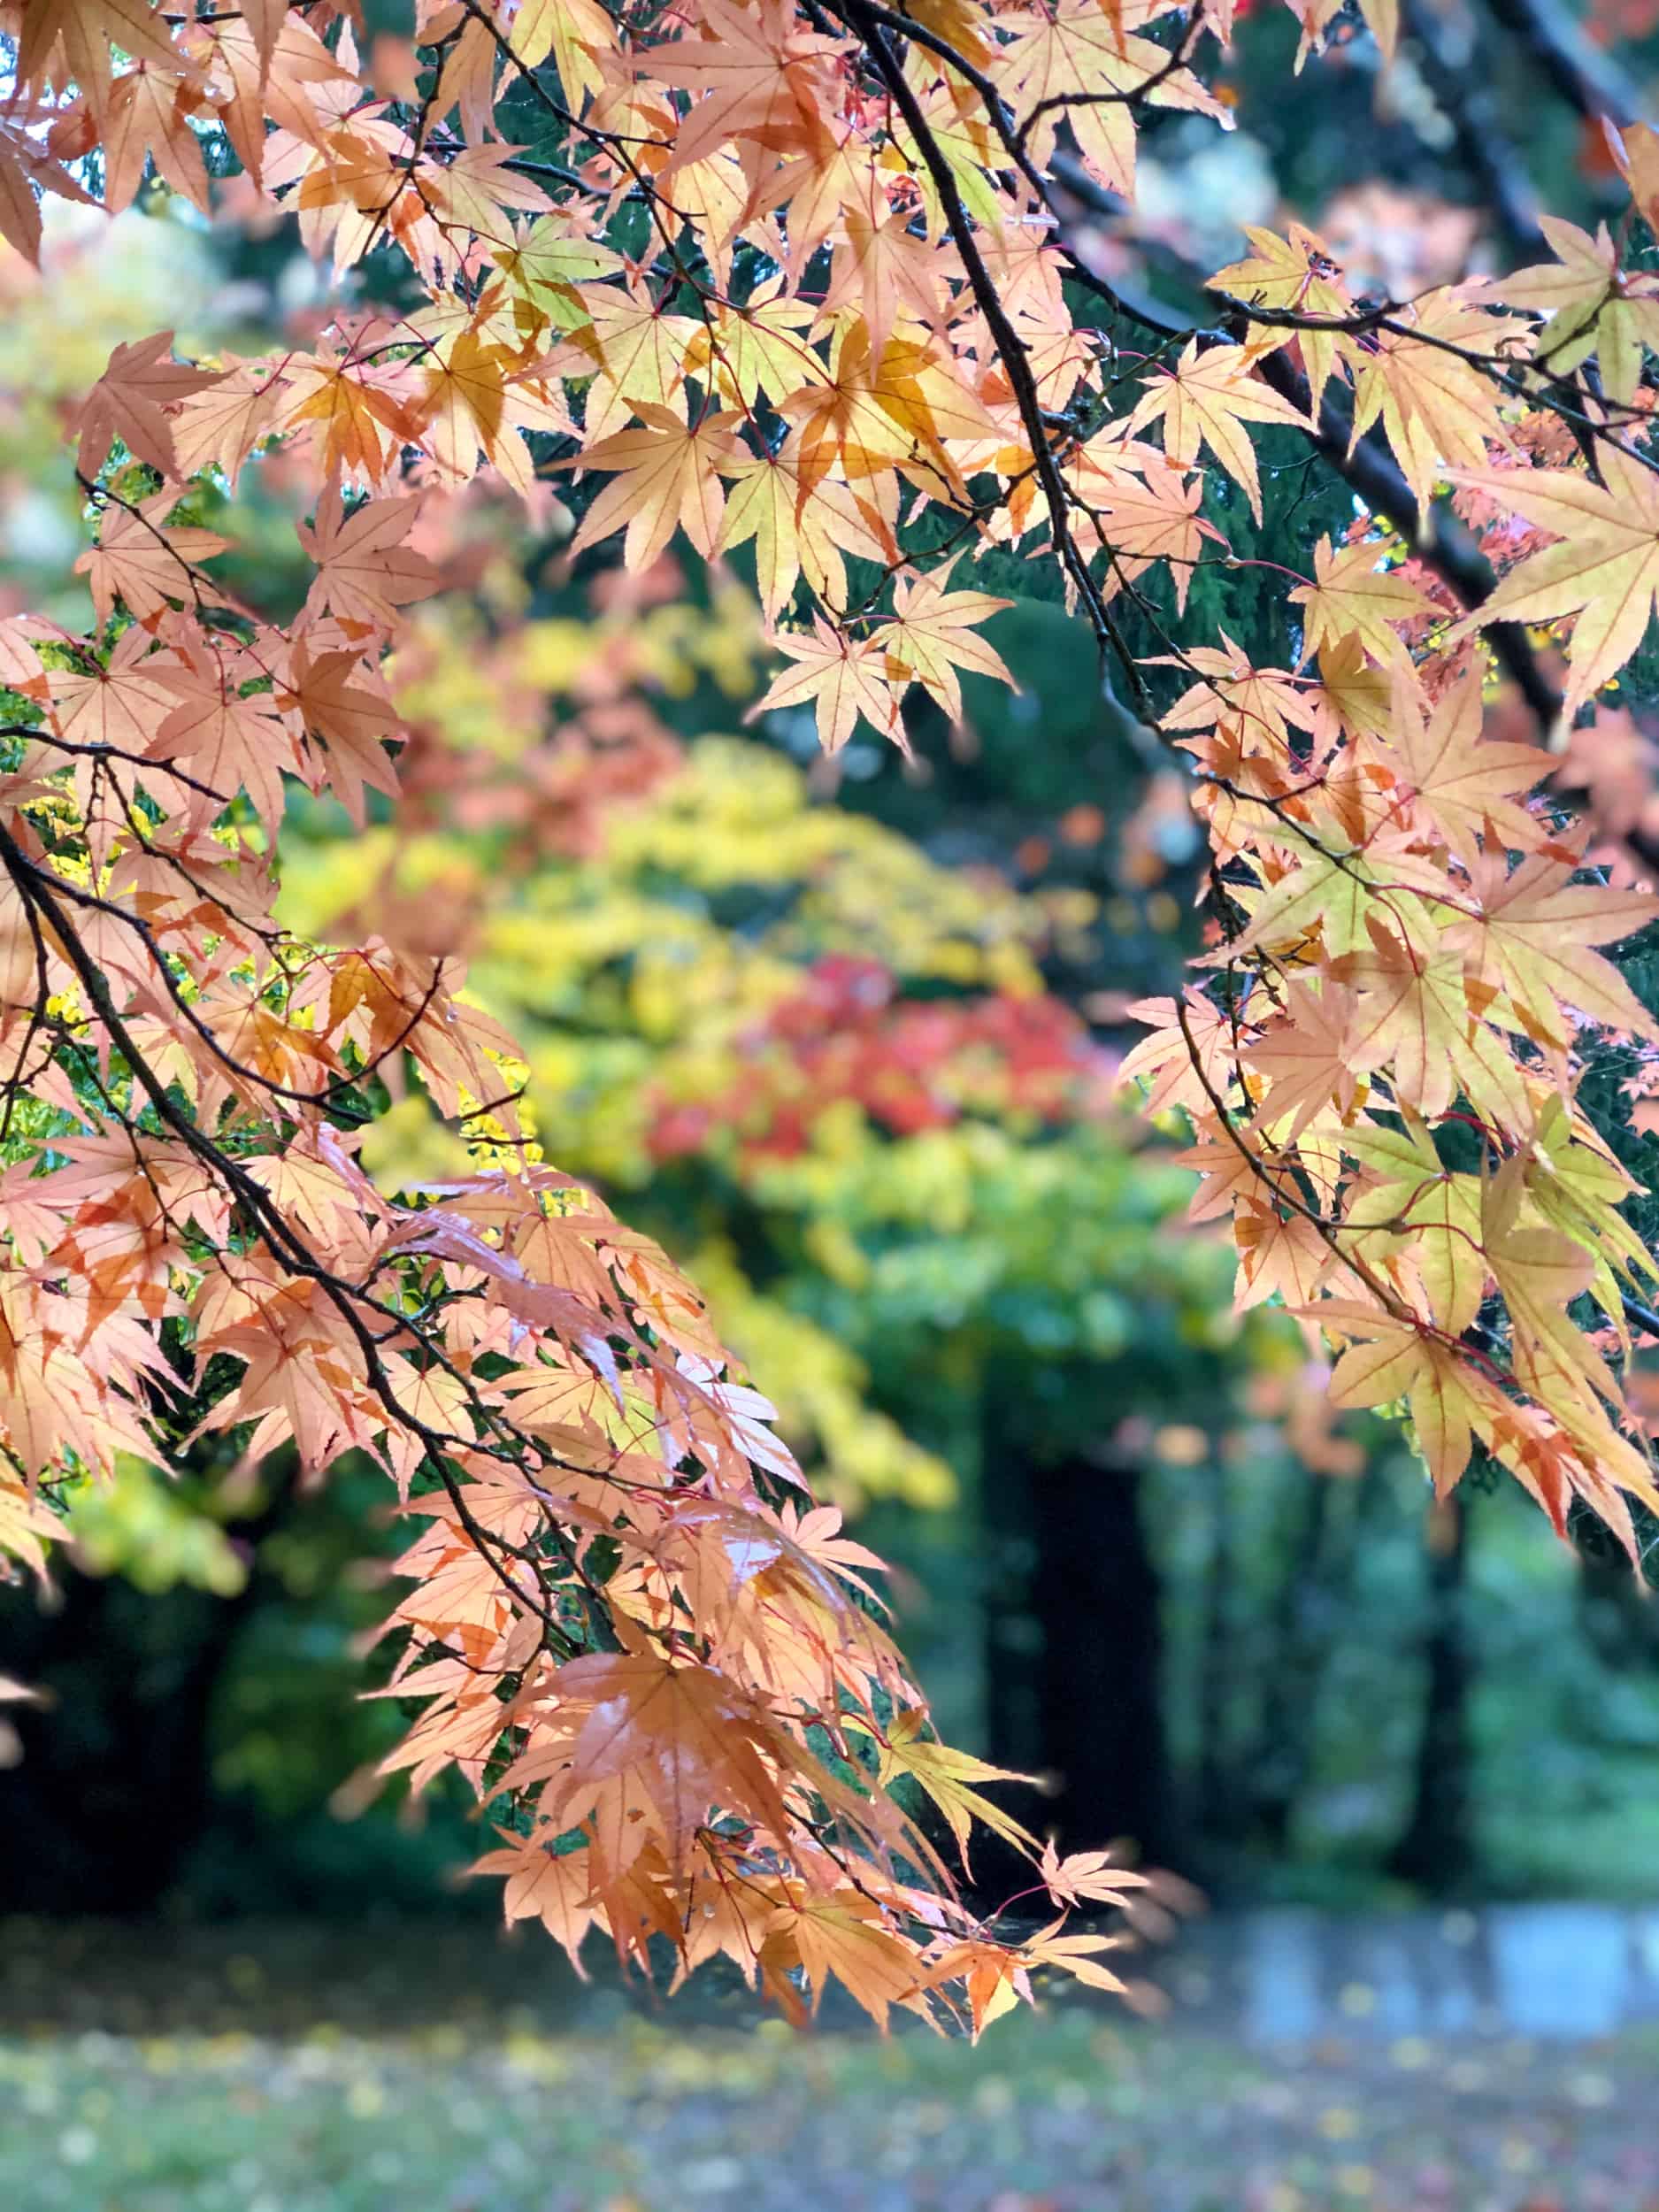 Where to find autumn leaves in London